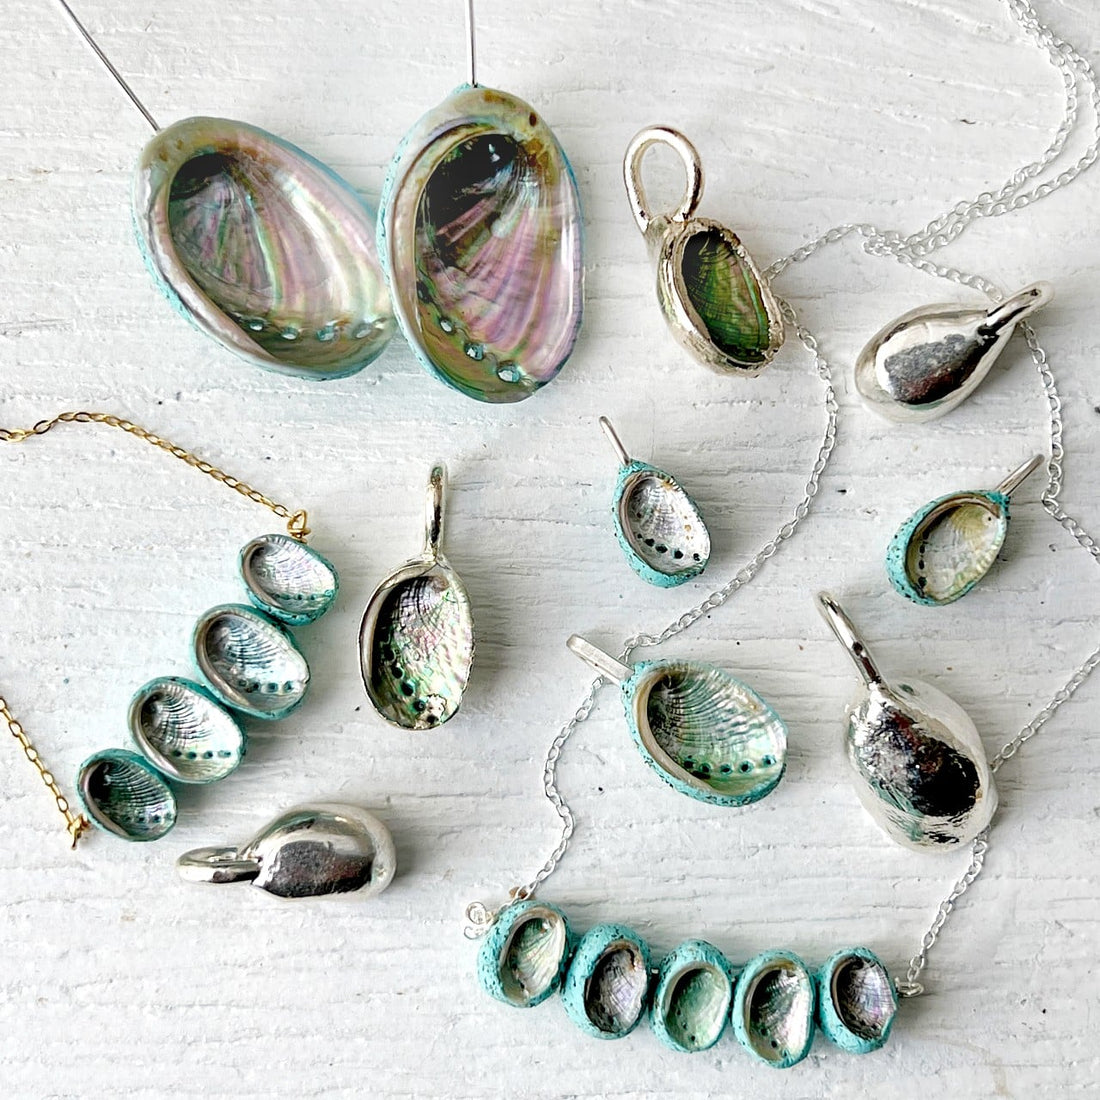 By far our bestselling handpicked nature find - the farmed paua shell!